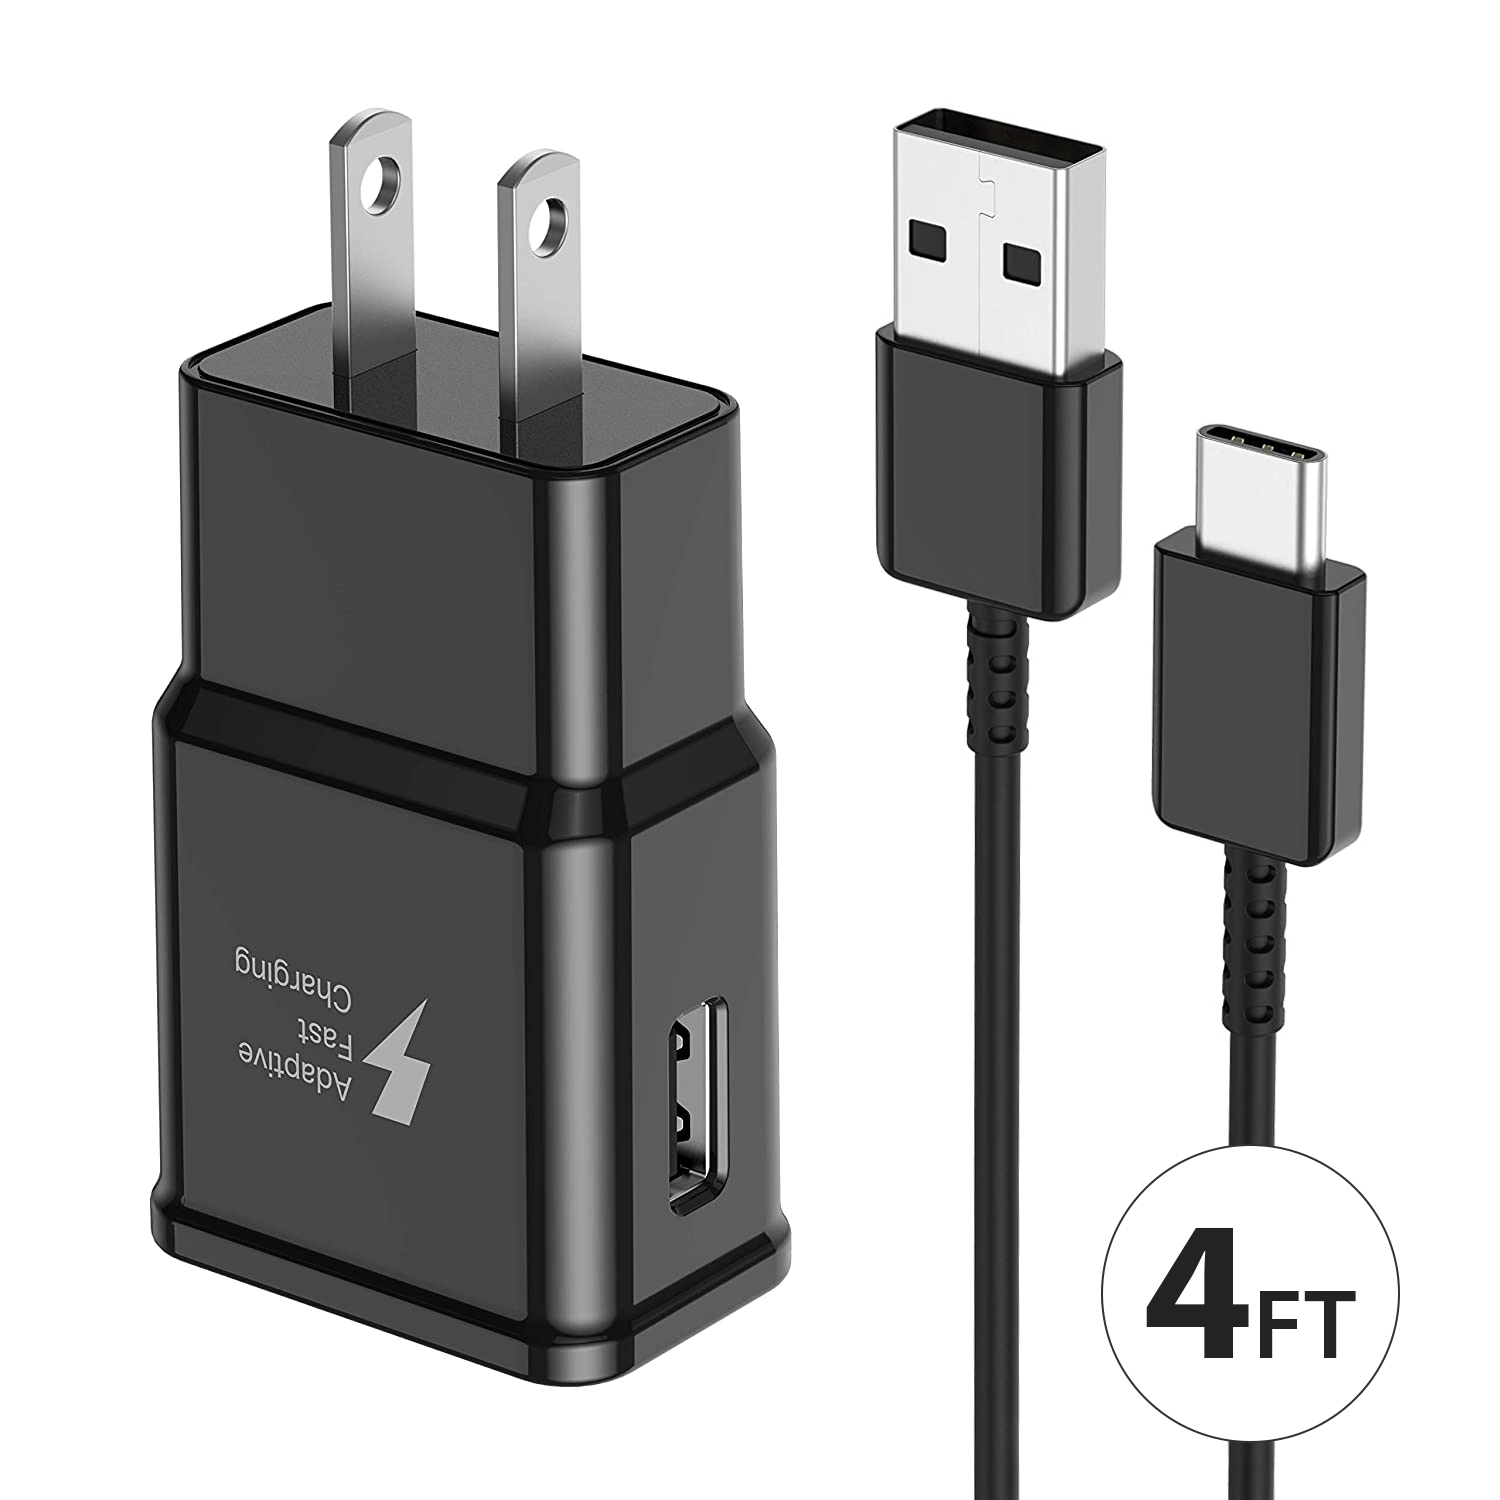 Fast USB Wall Charger Cable 4 Feet USB-C Type-C 3.1 Data Sync Charger Cable Cord For Samsung Galaxy S10 S9 S9+ Galaxy S8 S8 Plus Nexus 5X 6P OnePlus 2 3 LG G5 G6 V20 HTC M10 Google Pixel XL - image 1 of 5